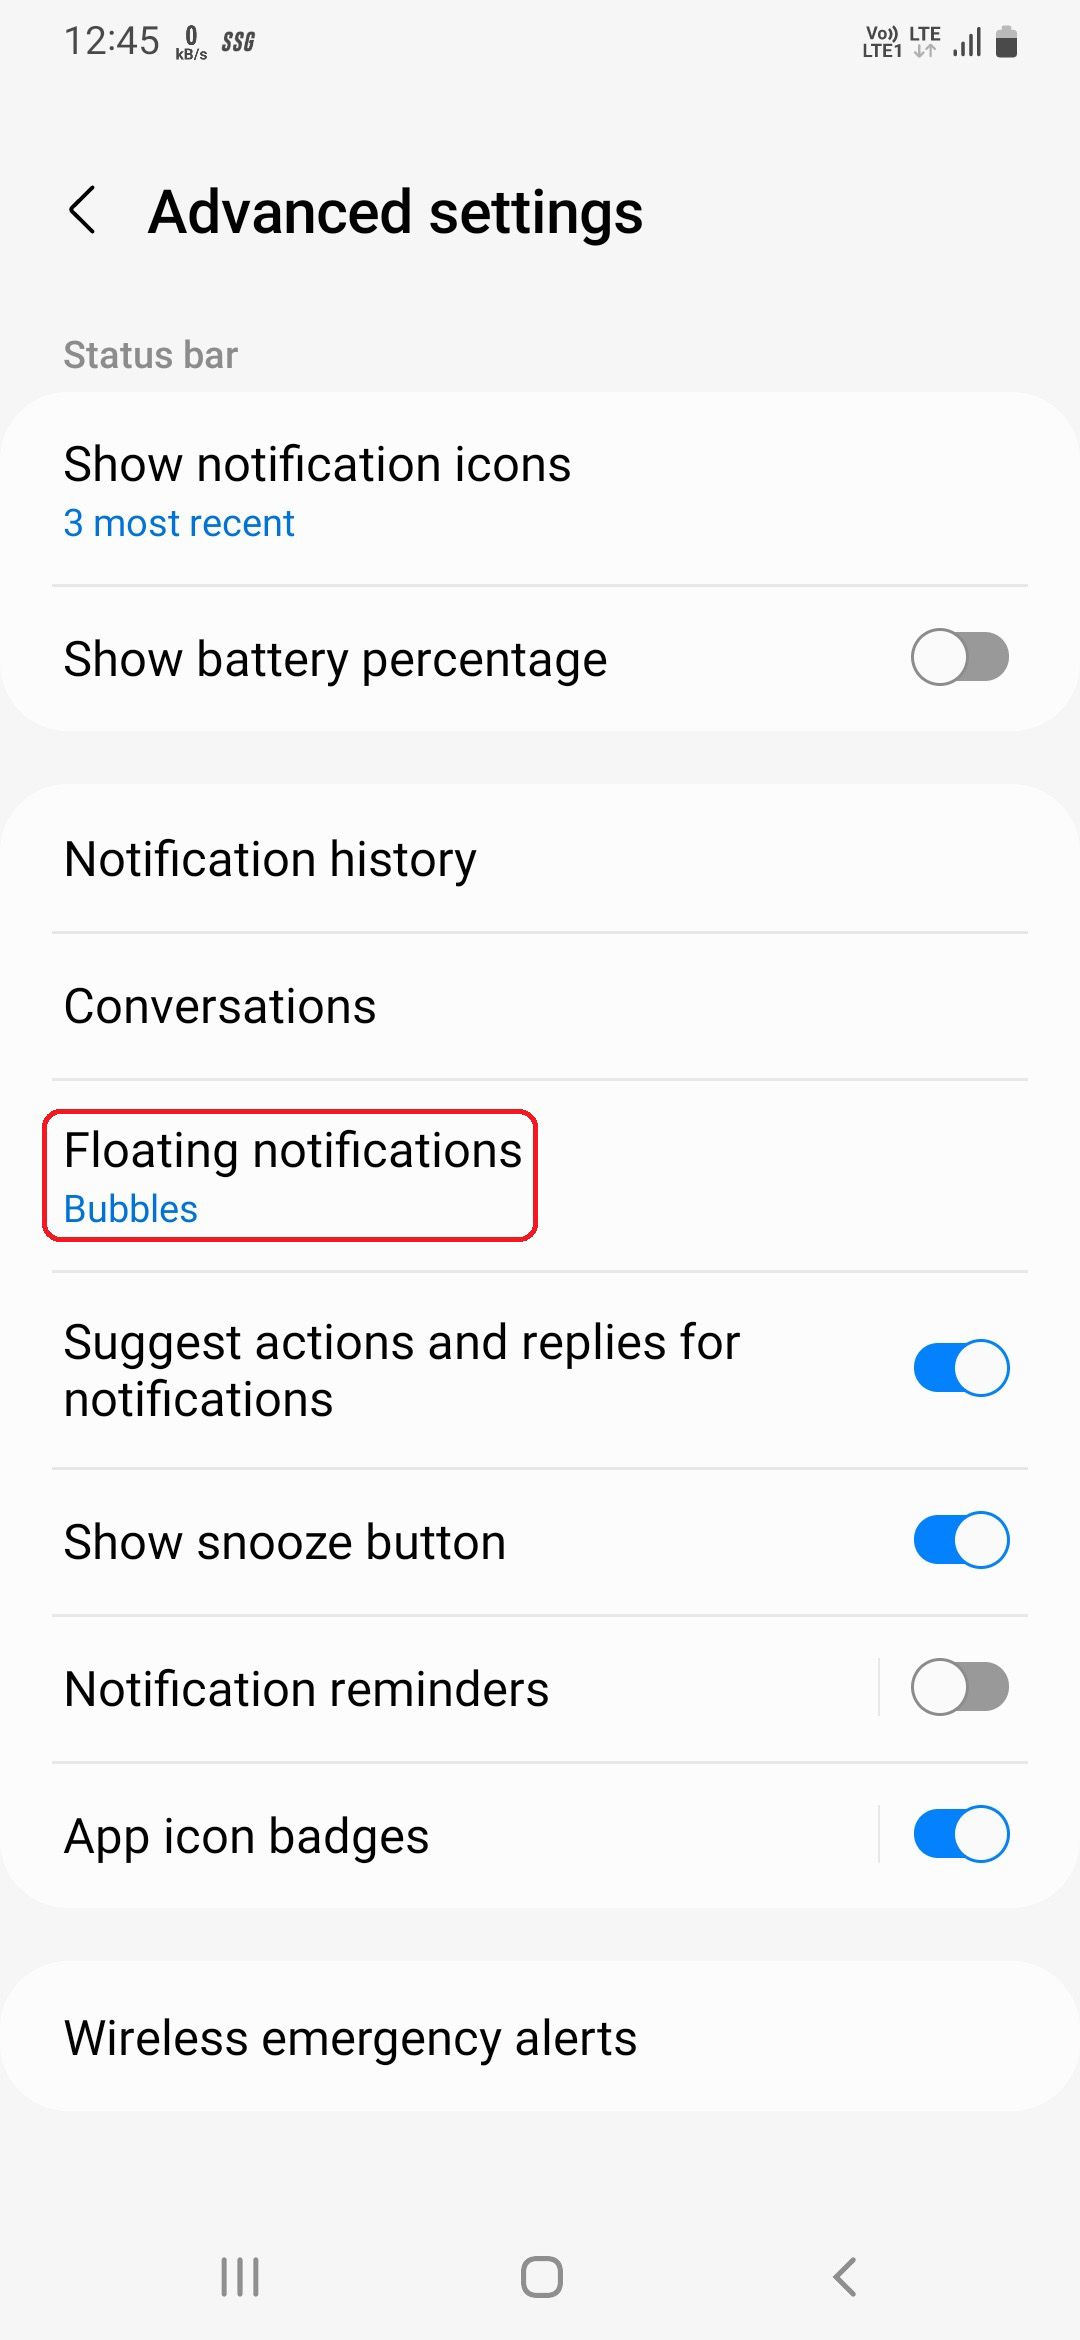 Option to enable floating notifications in advanced settings